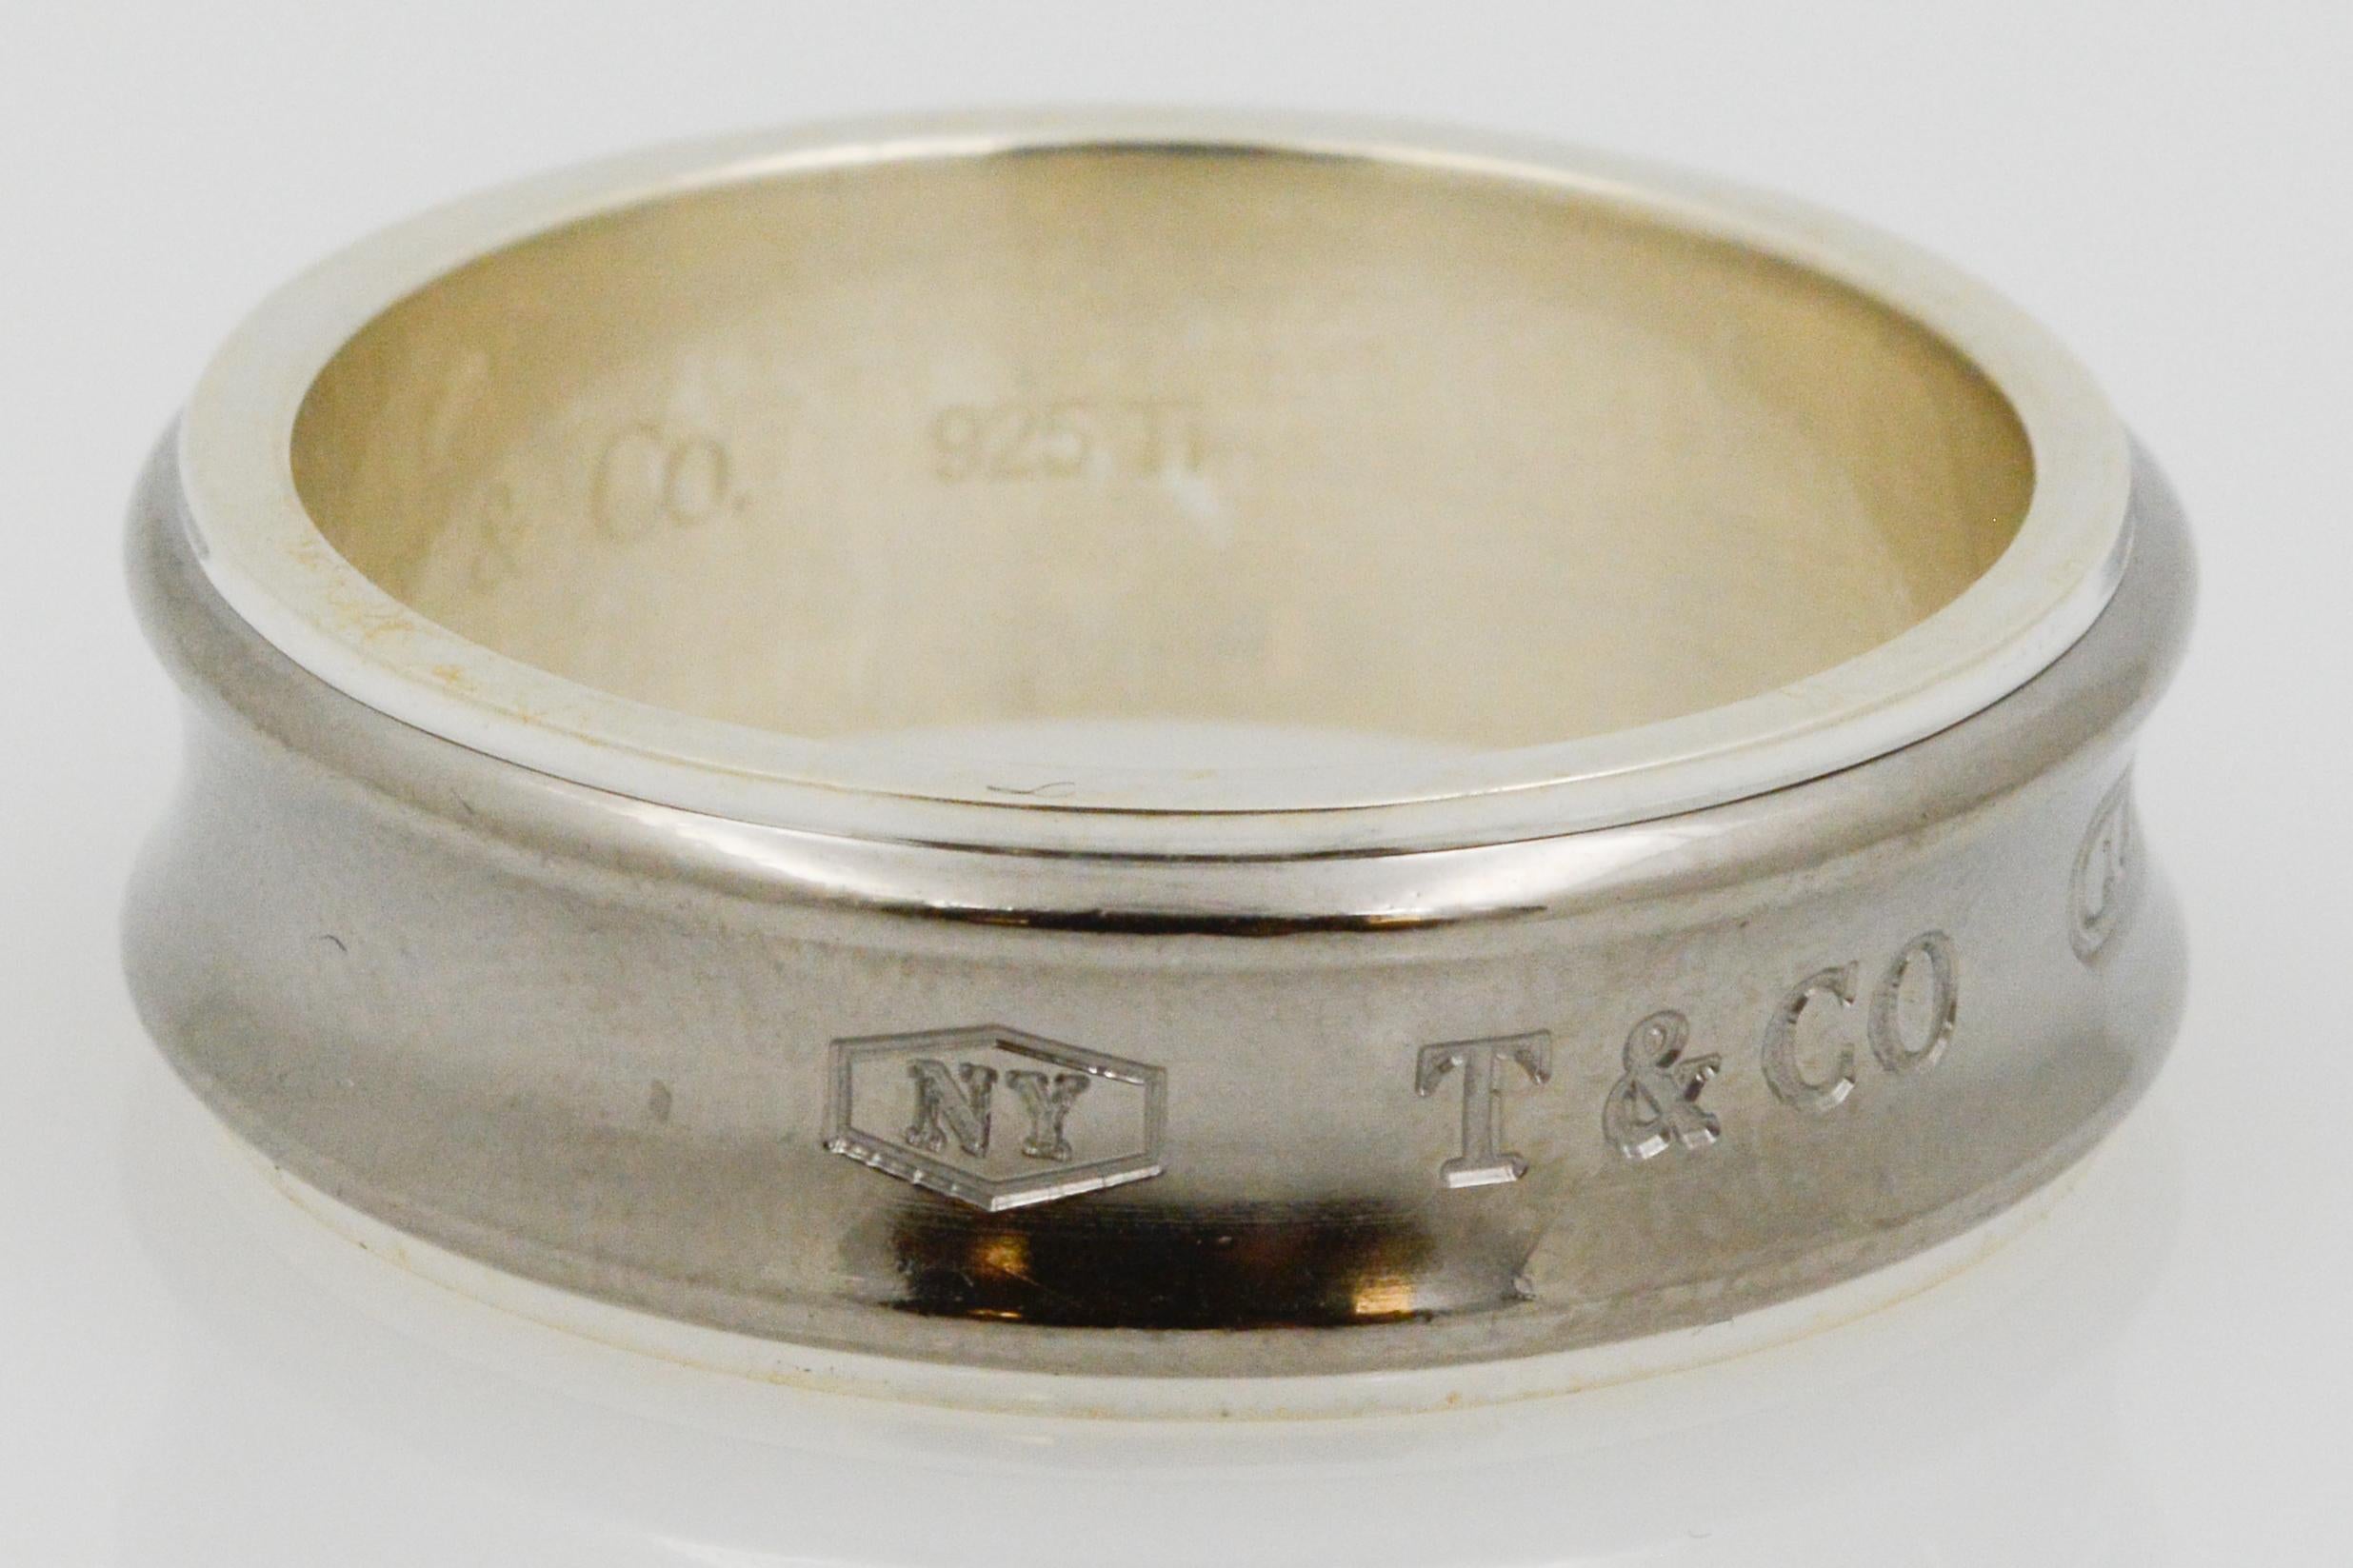 This Tiffany & Co. sterling silver ring has the T&CO logo with NY and 1887 stamped onto the front of the ring. The band has a concave middle that is unique to other silver rings. 